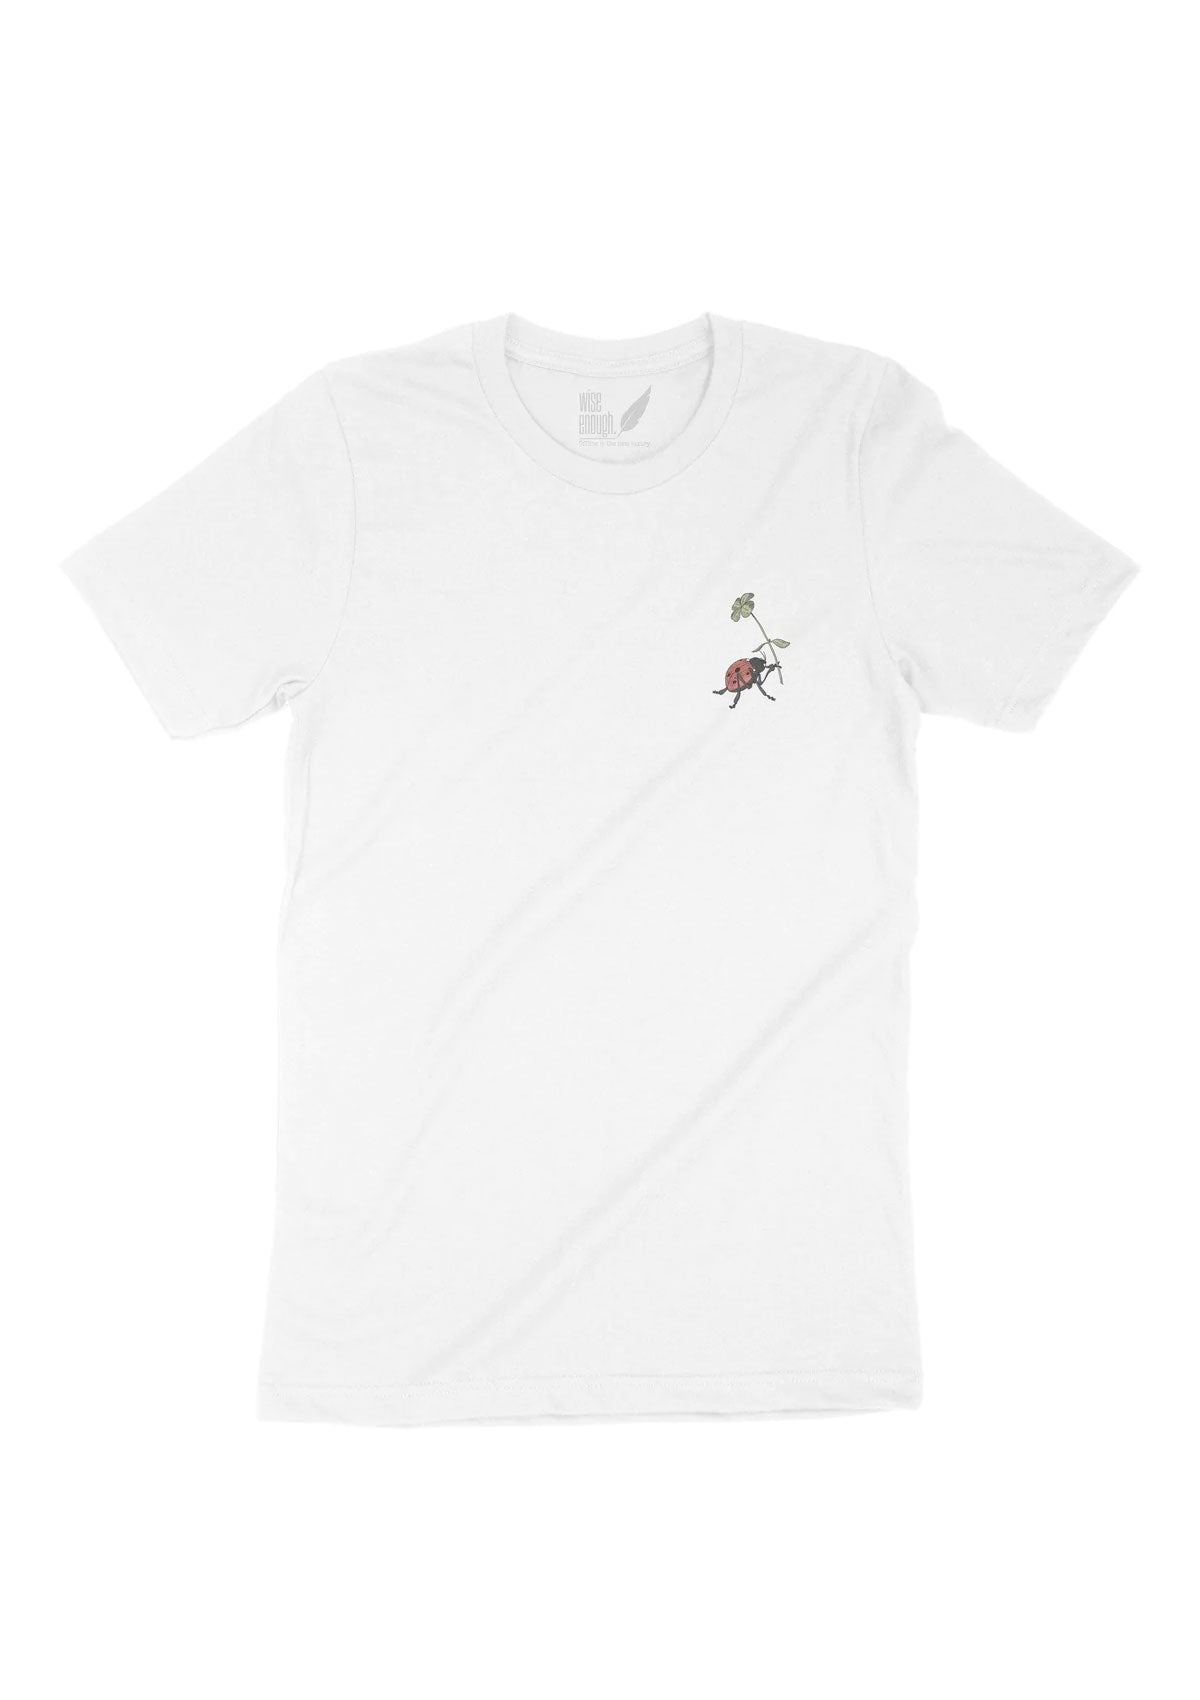 T-Shirt Lucky bug - wise enough